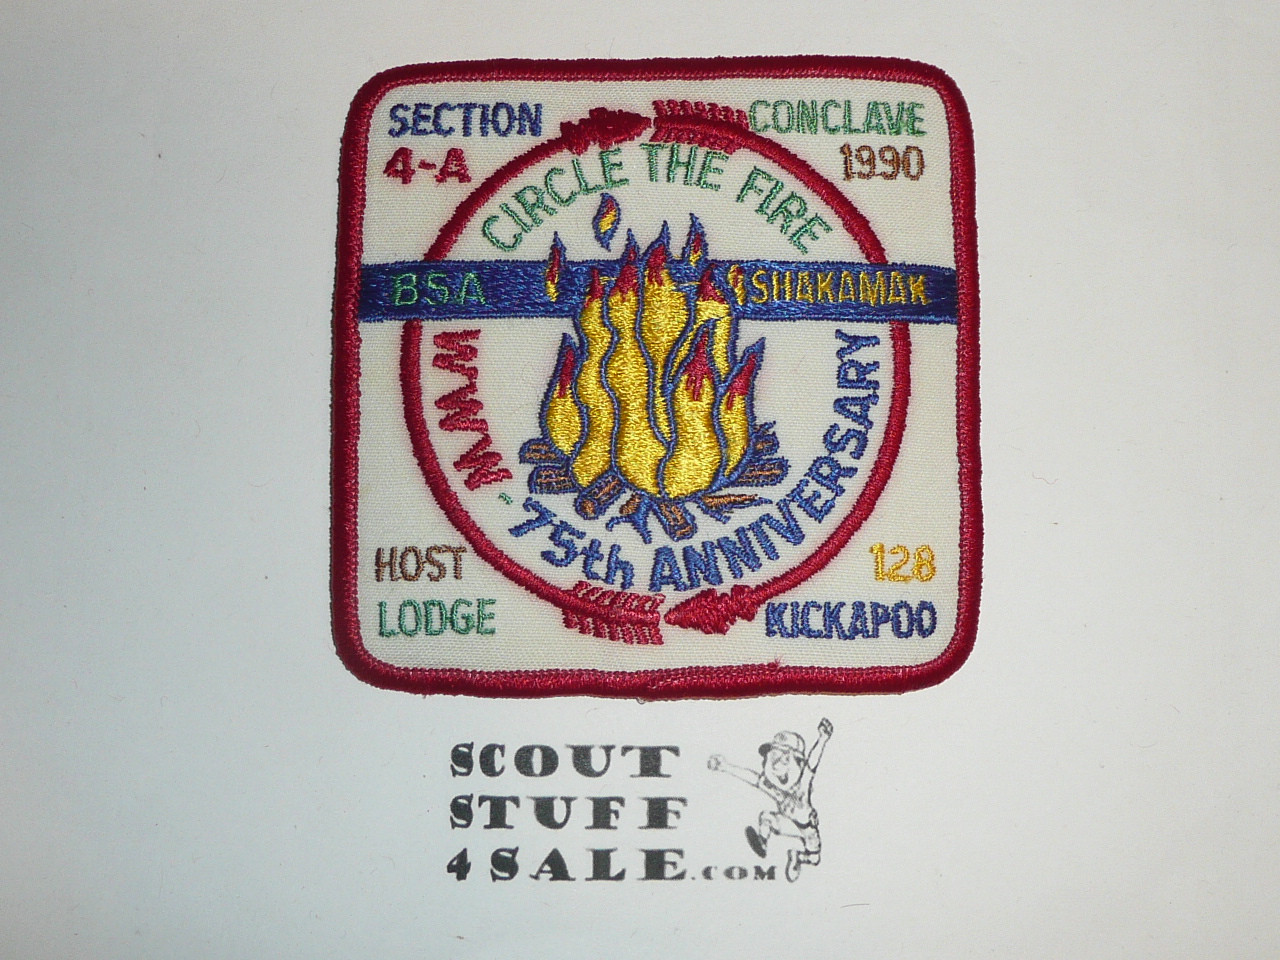 Section EC 4A 1990 O.A. Conference Patch - Scout